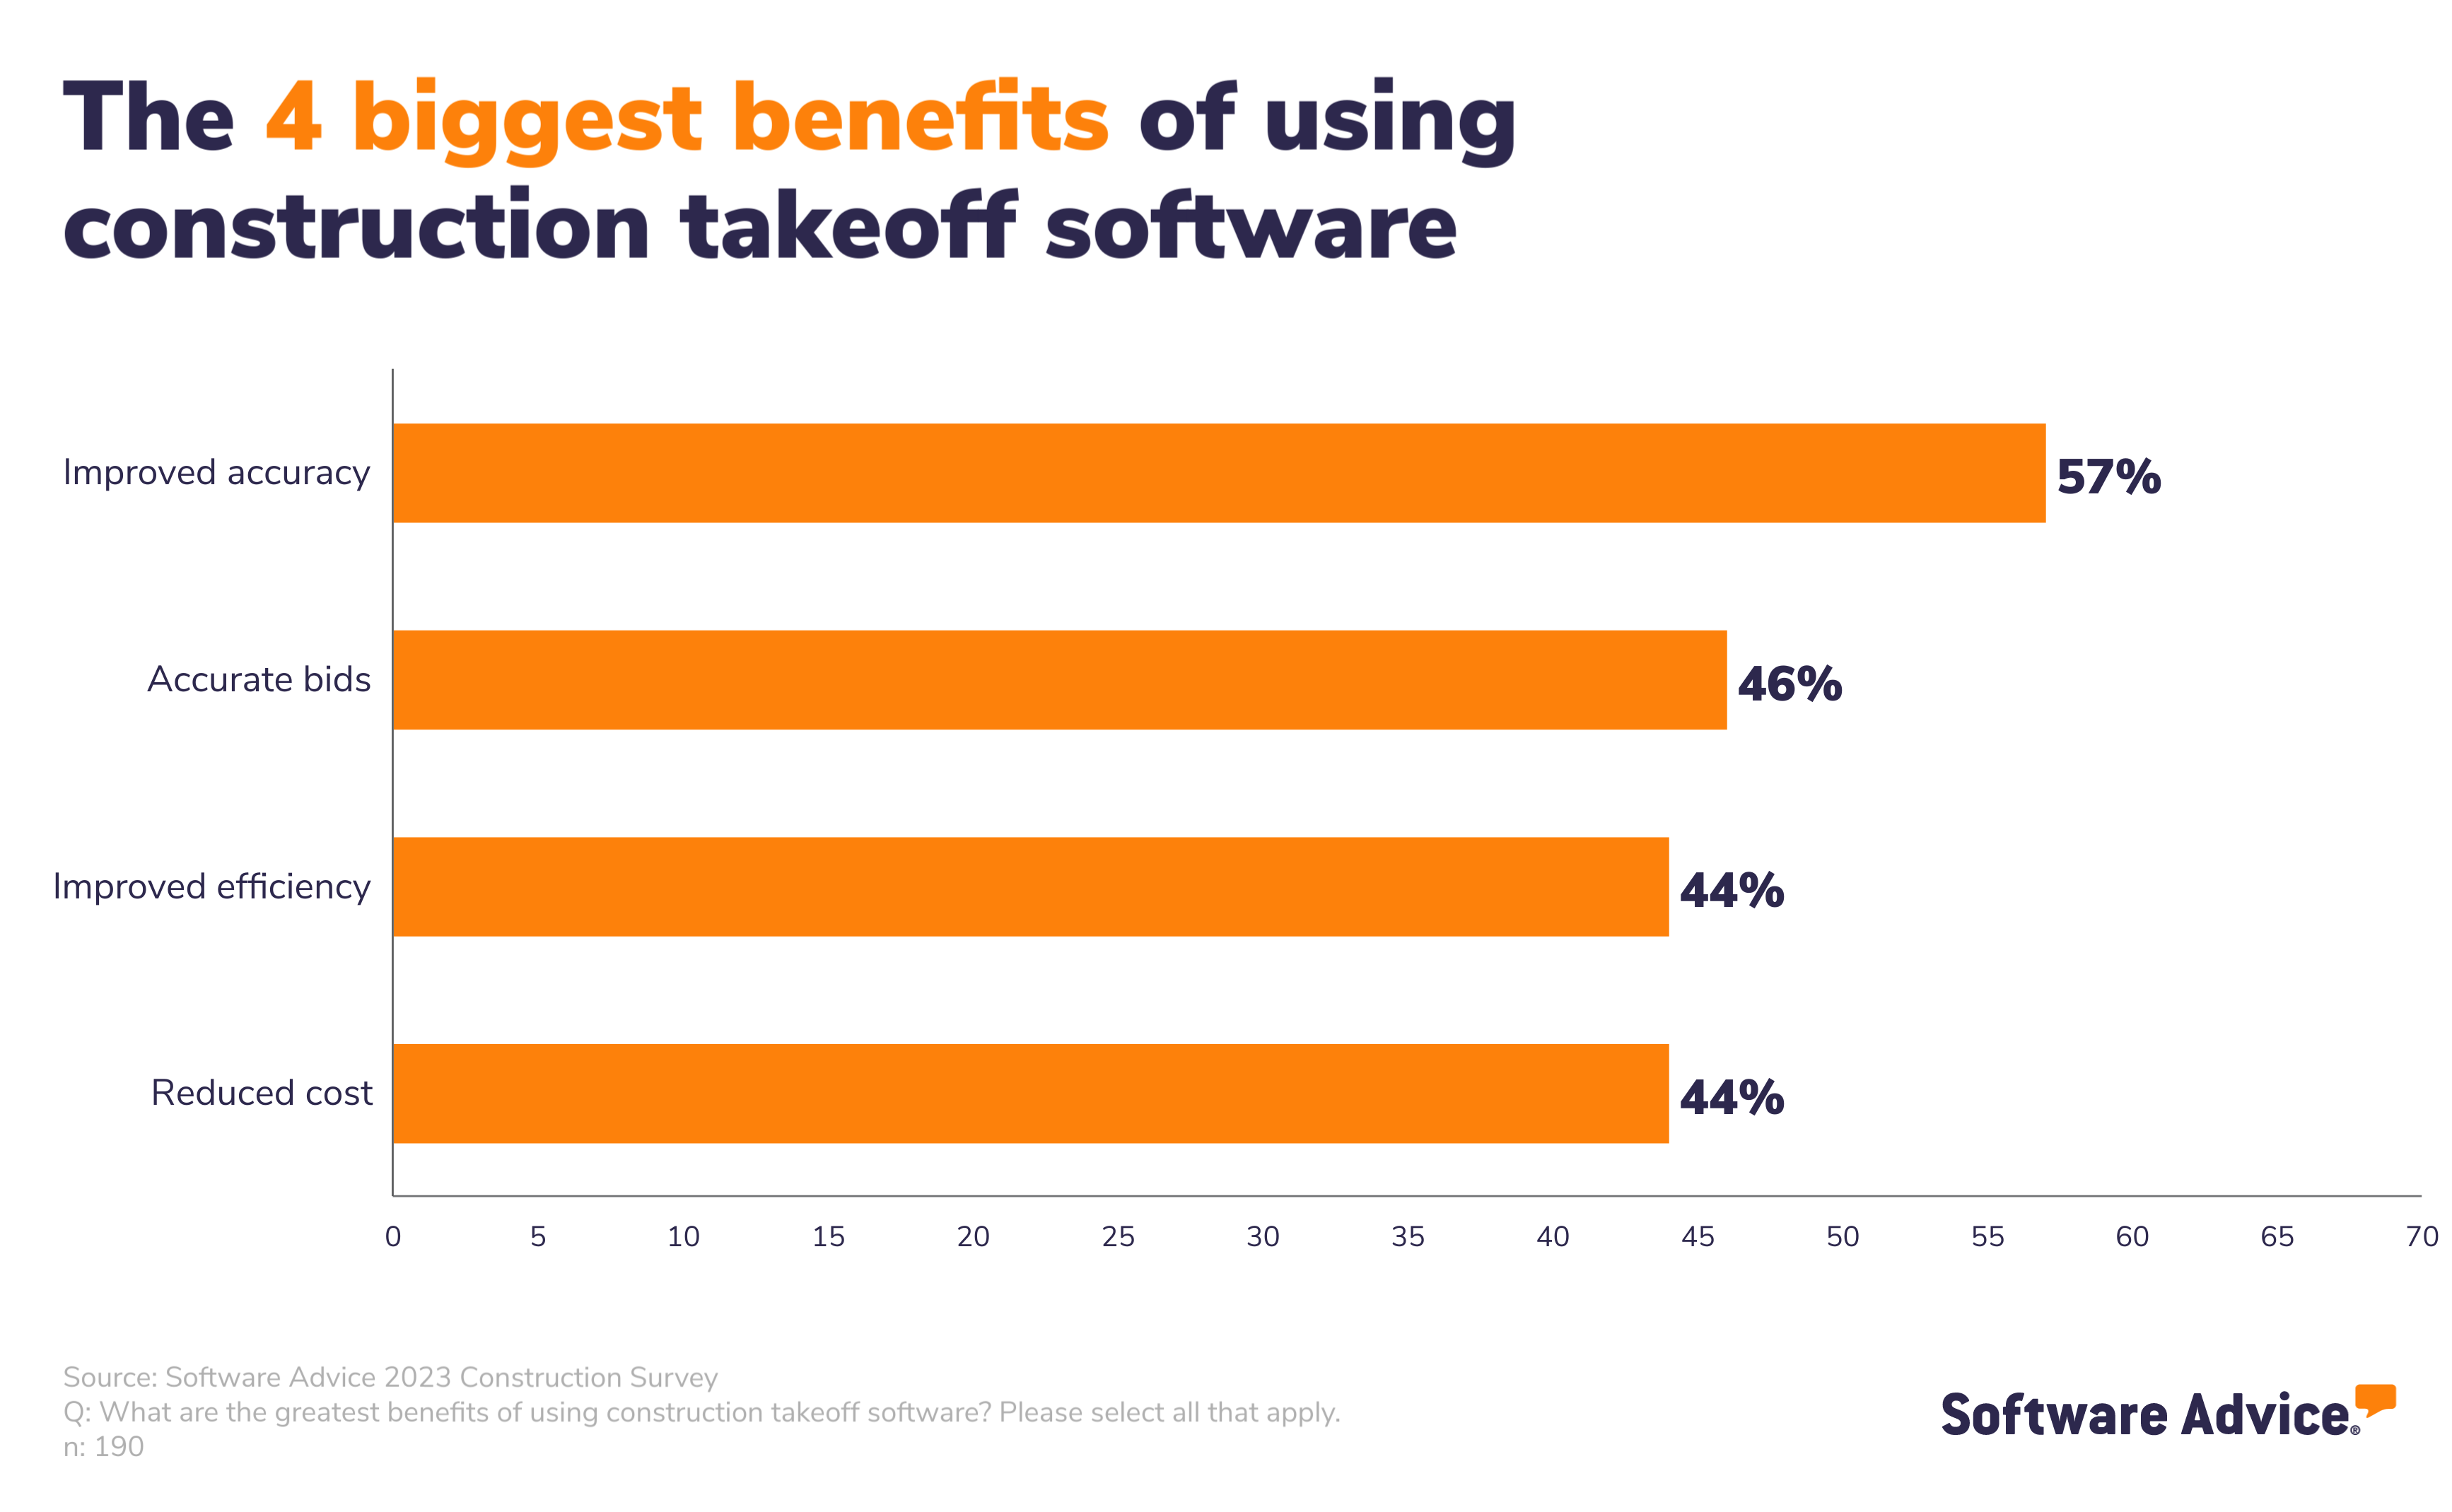 A graphic showing the 4 biggest benefits of using construction takeoff software, according to construction professionals: improved accuracy (57%), more accurate bids (46%), improved efficiency (44%), reduced cost (44%)